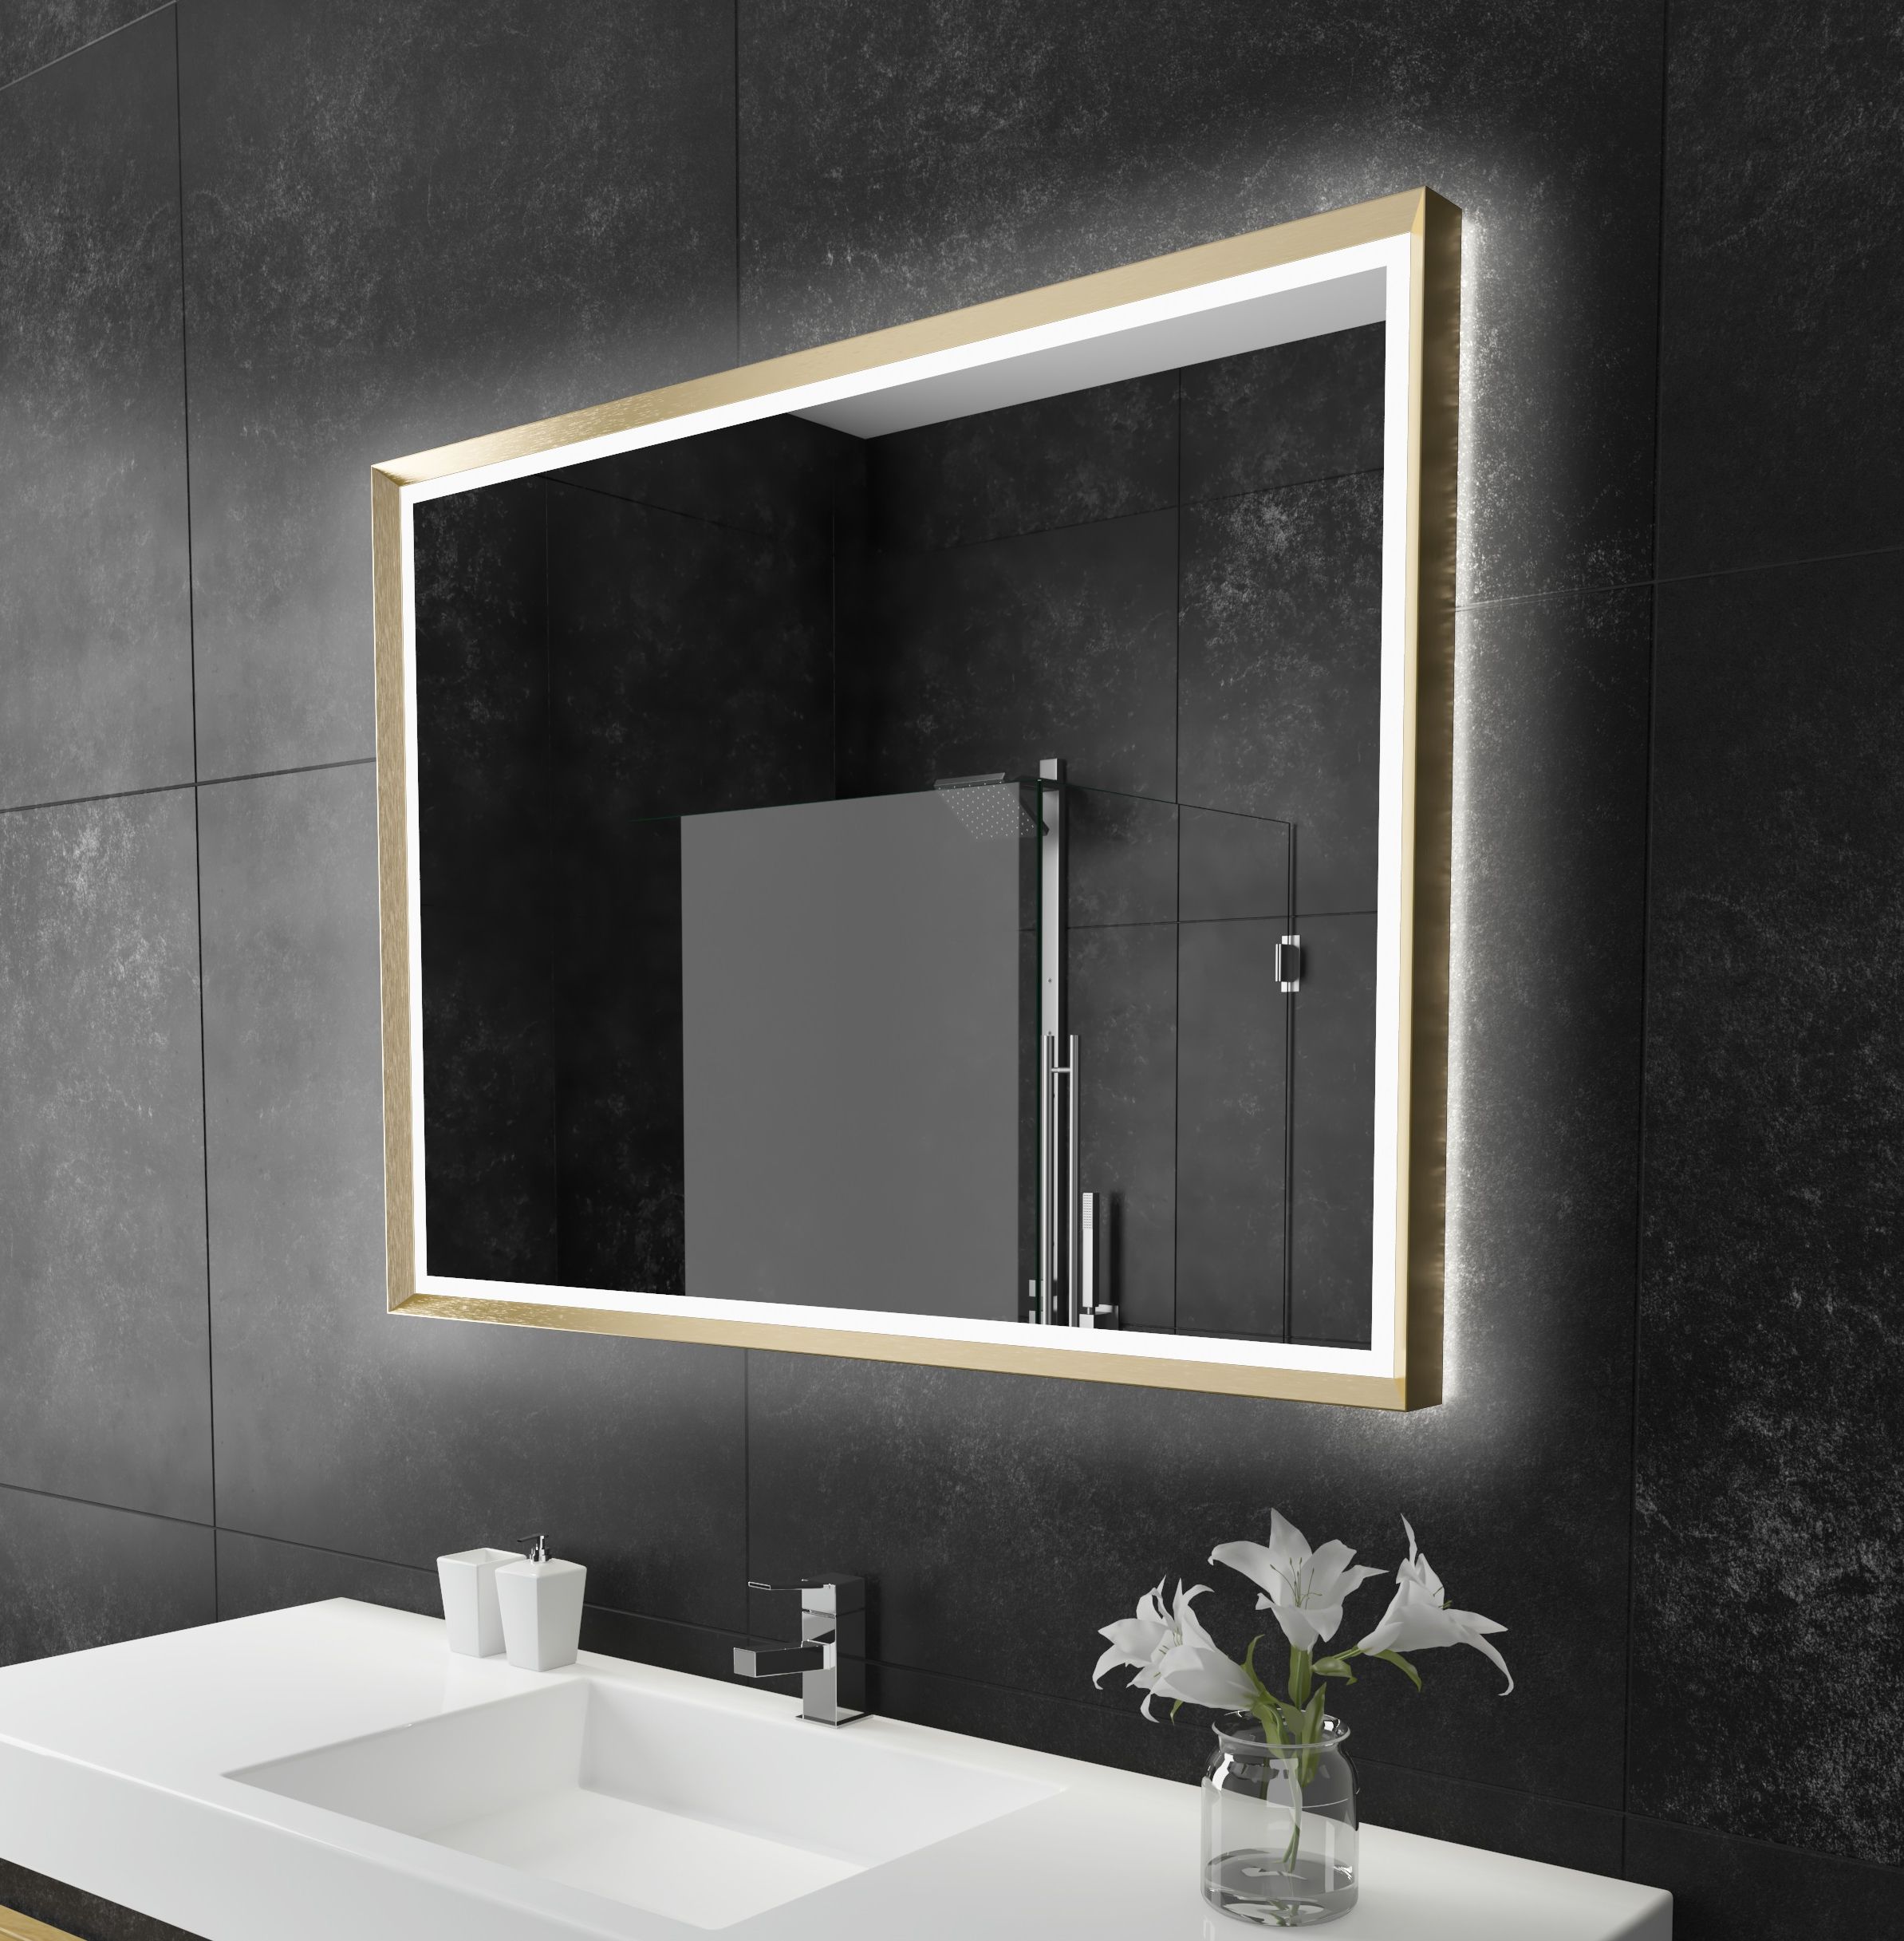 Backlit Mirror Opera 48 X 35 Gold Inside Popular Edge Lit Square Led Wall Mirrors (View 1 of 15)